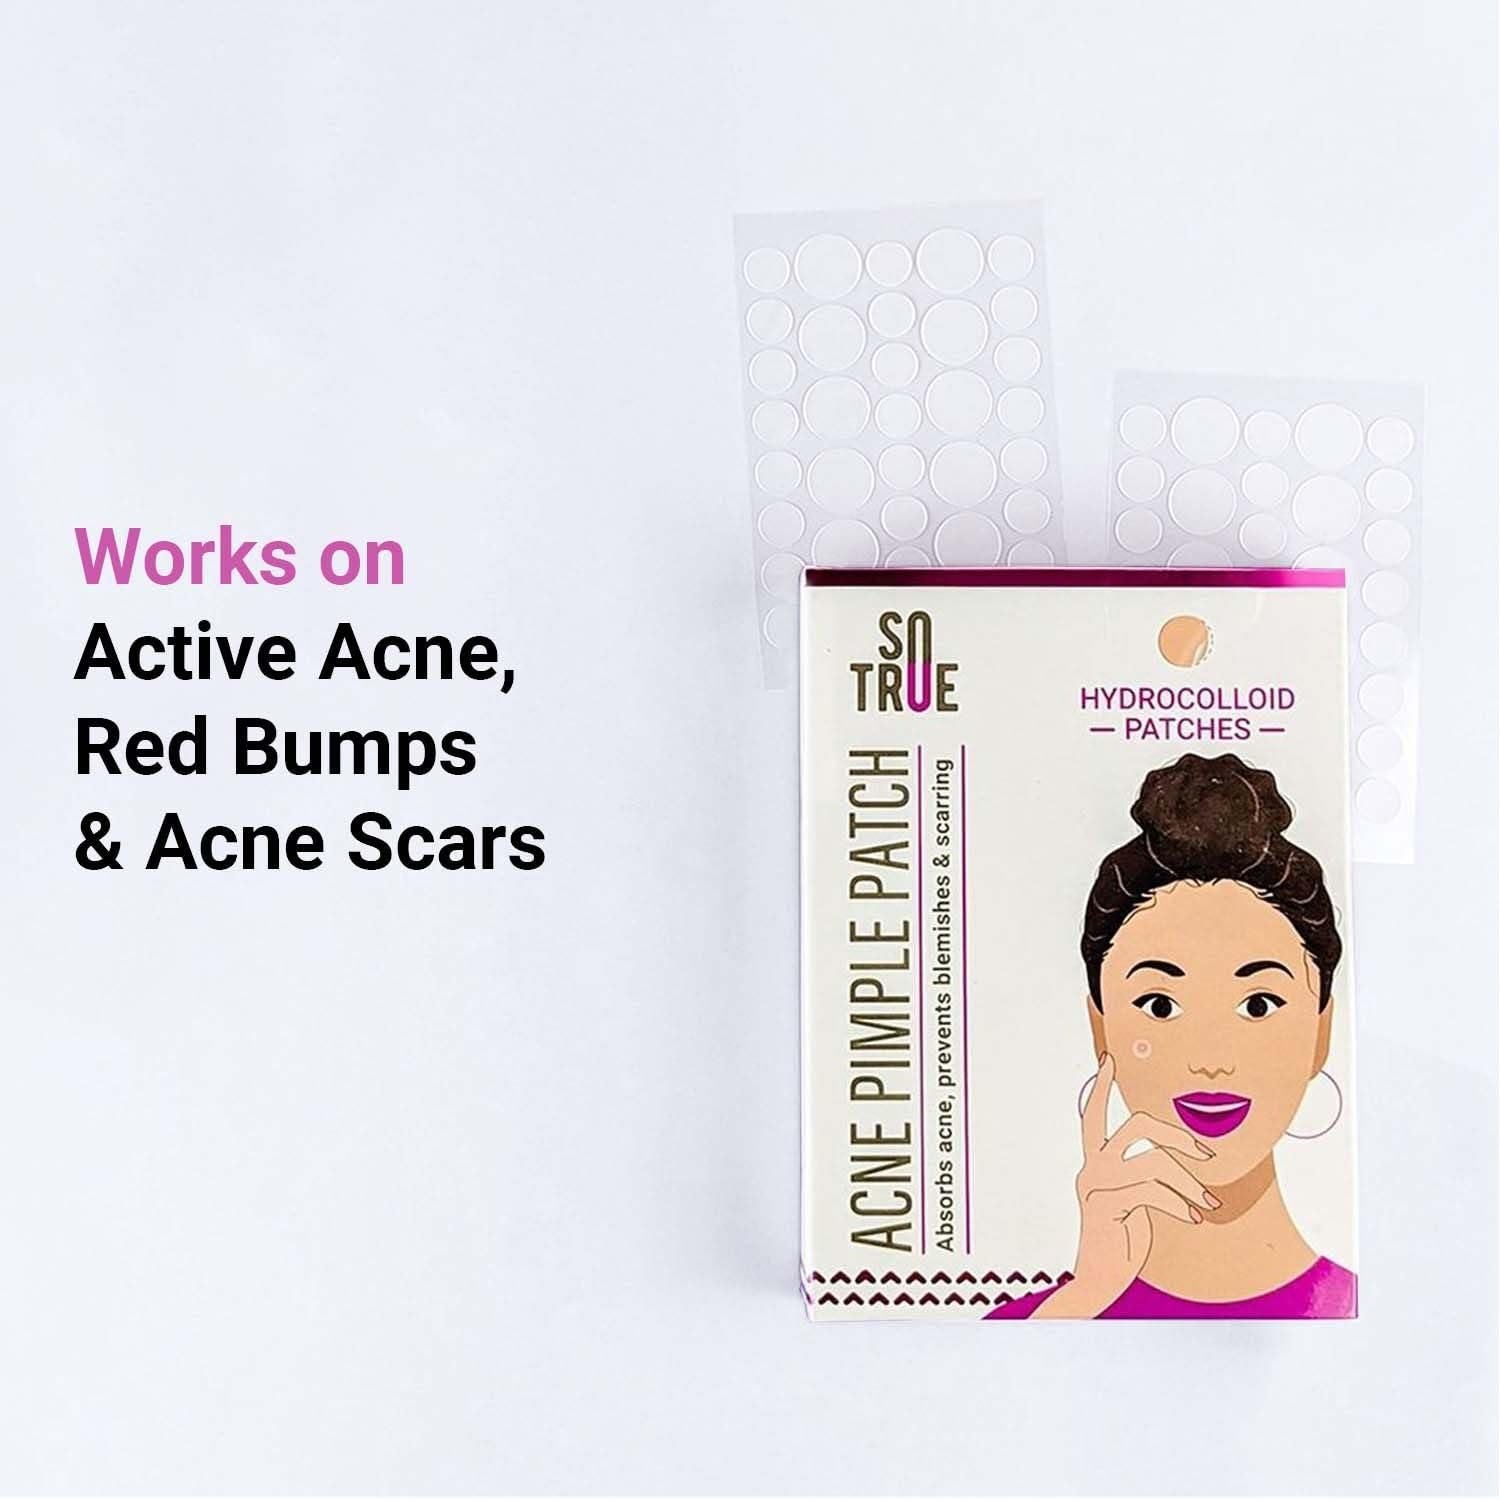 SoTrue Acne Pimple Patches For Face Hydrocolloid Waterproof Patches (36 Patches)